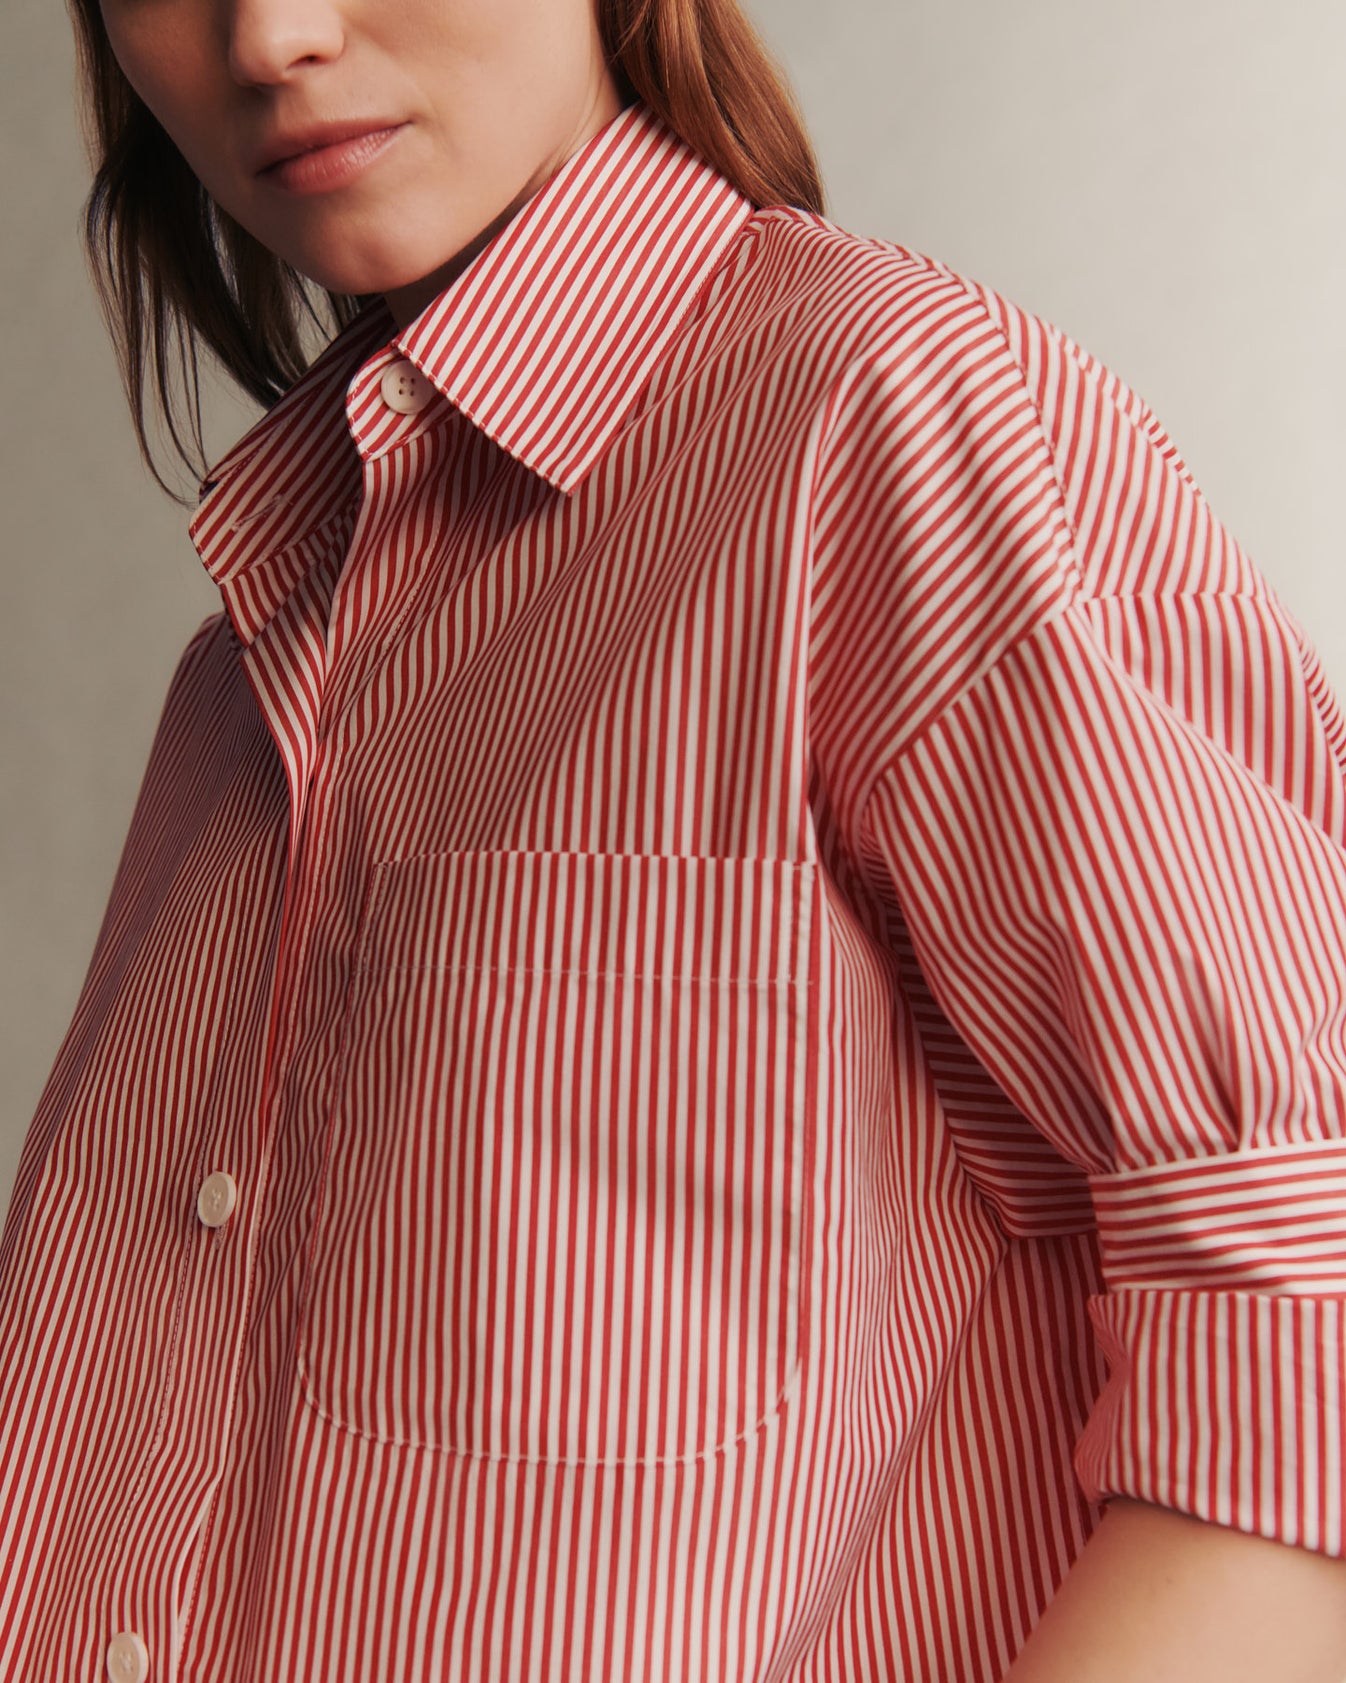 TWP Red / white Next Ex Shirt in Awning Lady Stripe view 3